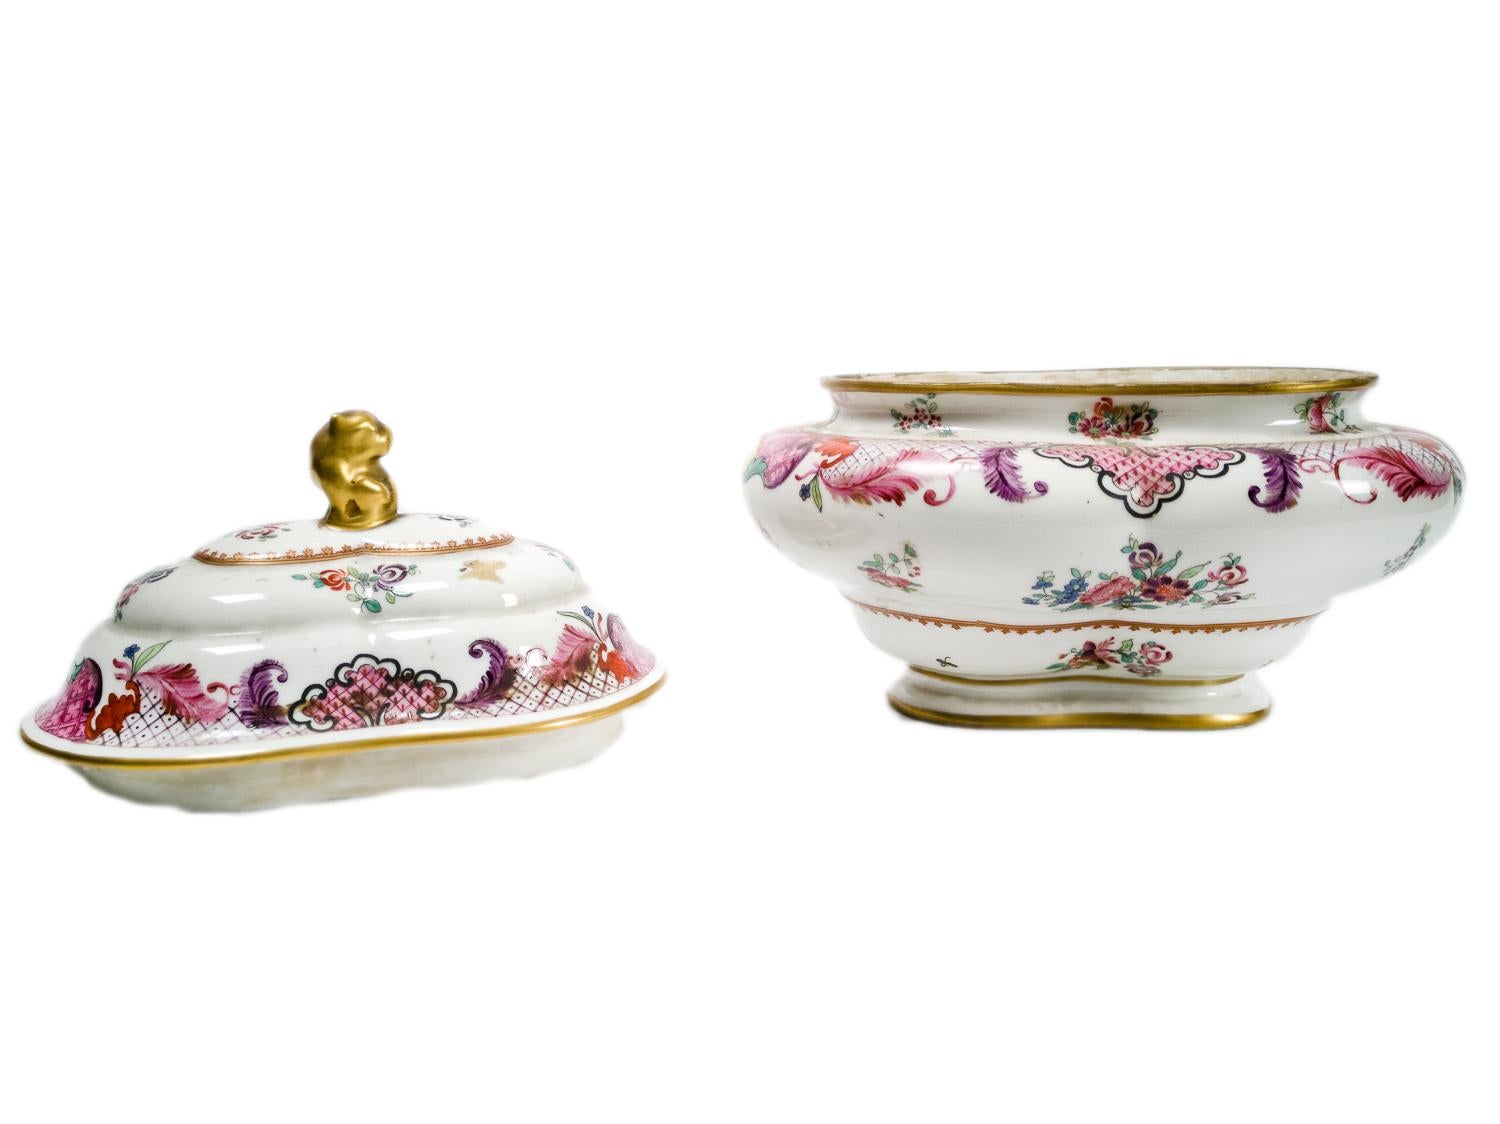 French Pink & White Porcelain Tureen by Edme Samson, 19th Century For Sale